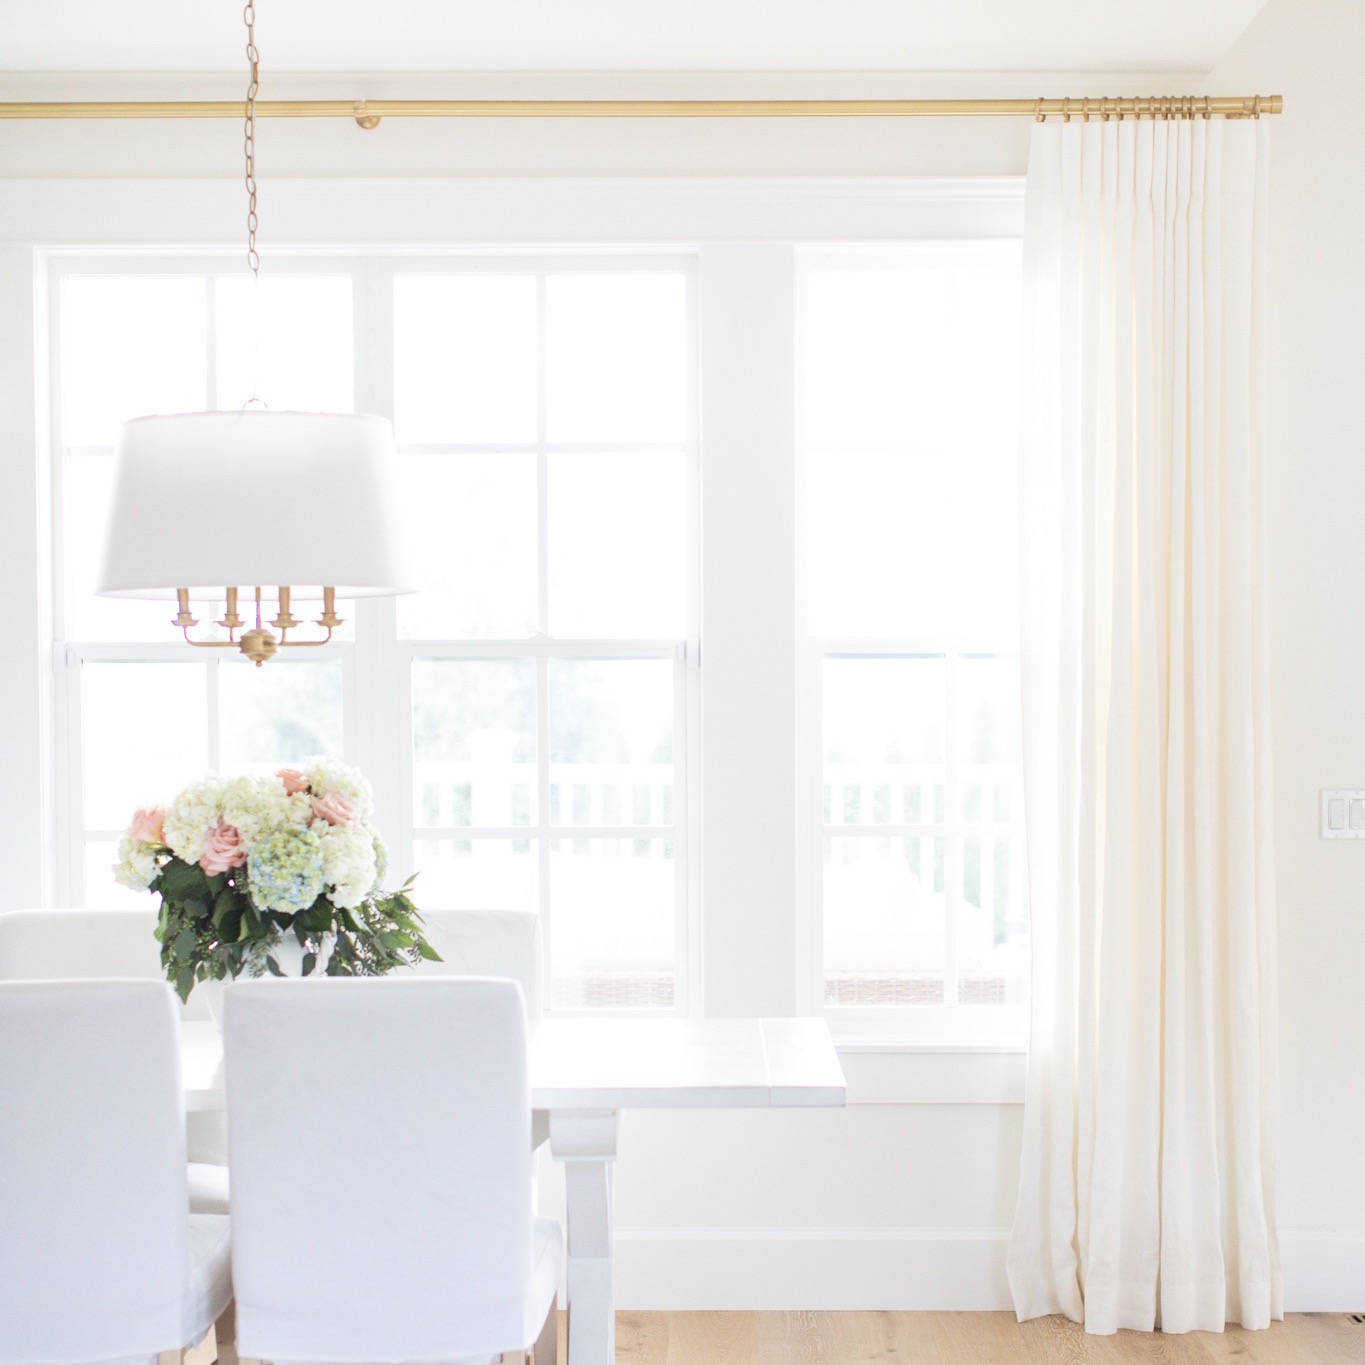 How to pick the perfect window coverings for your home